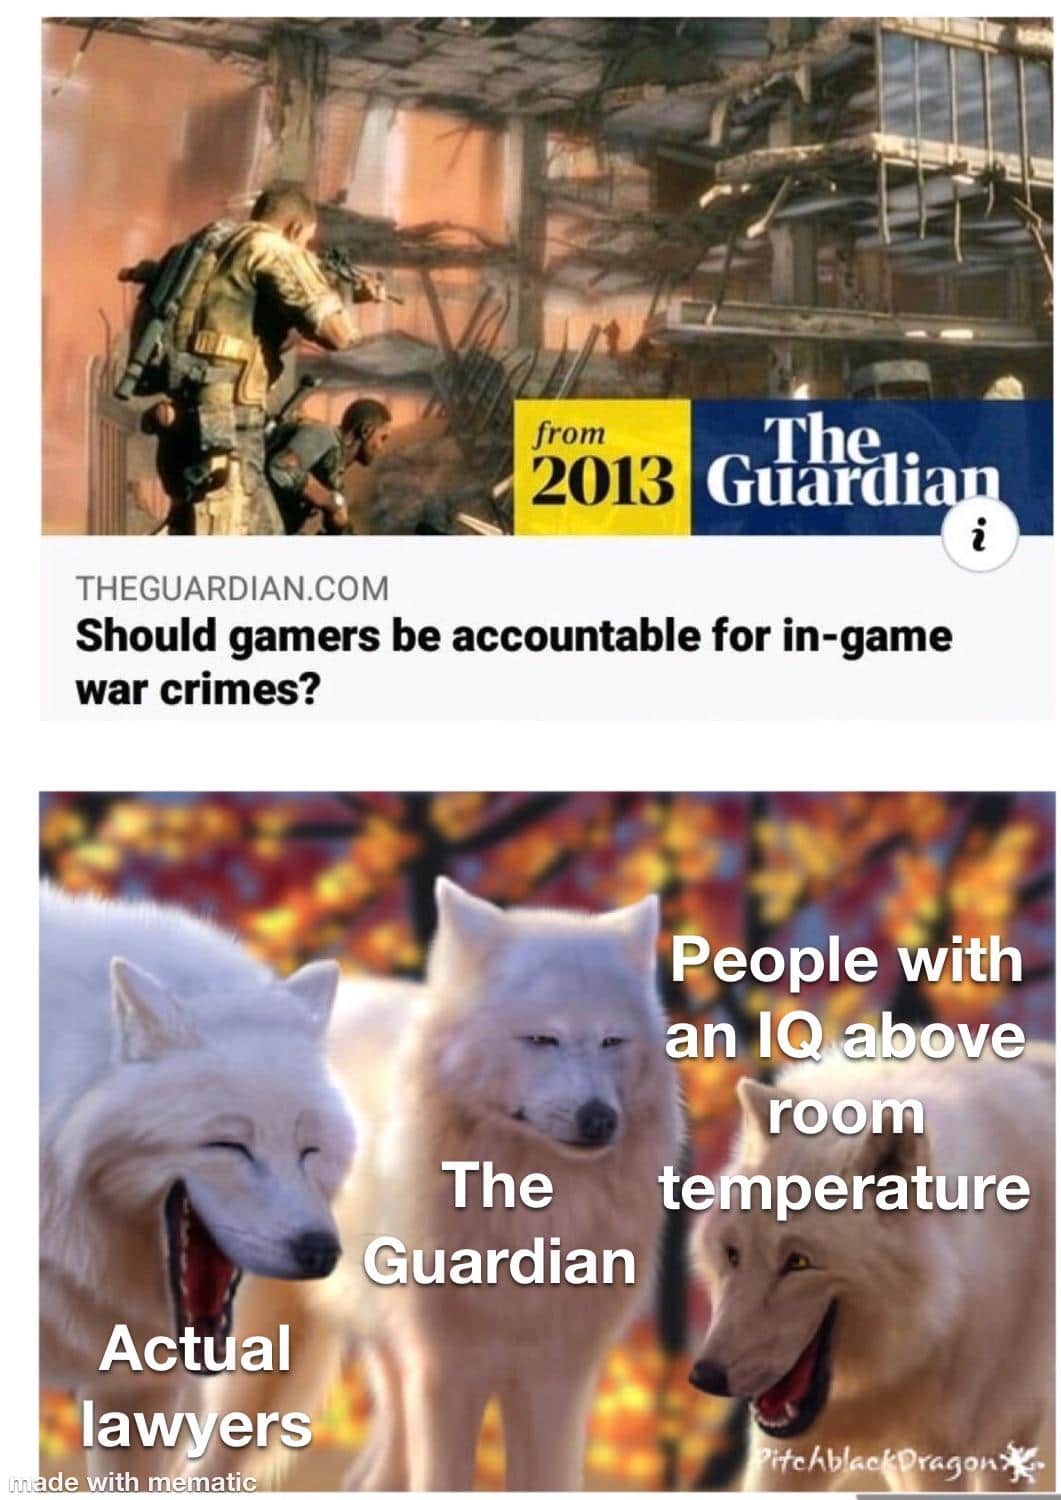 Funny, Celsius, IQ, Fahrenheit, The Guardian, Kelvin other memes Funny, Celsius, IQ, Fahrenheit, The Guardian, Kelvin text: The t Guardi THEGUARDIAN.COM Should gamers be accountable for in-game war crimes? ?eople with nib boxe room The ie perature de ith ati 